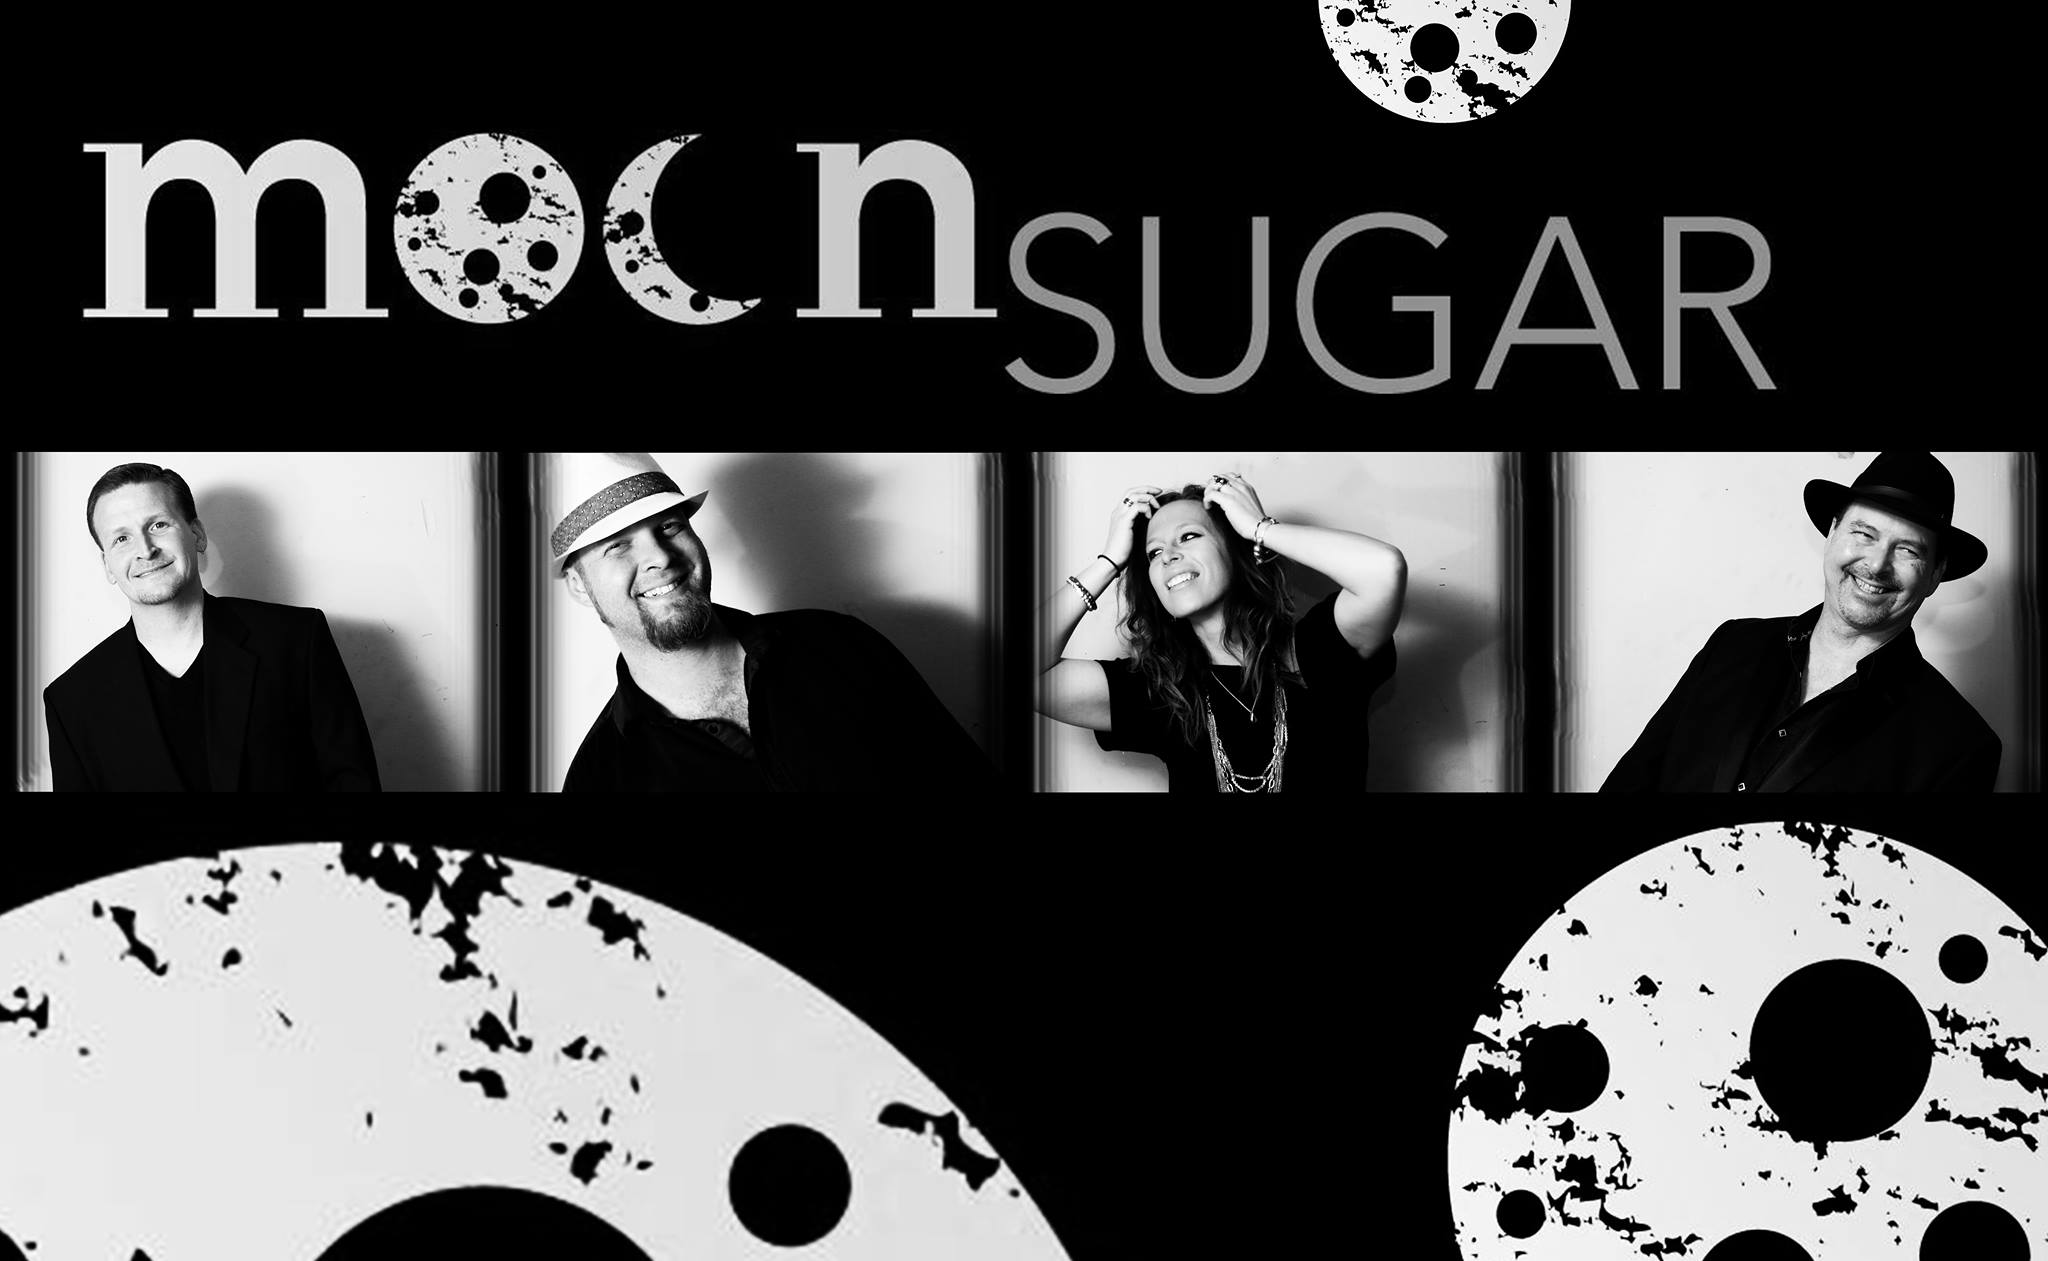 Live Music featuring Moon Sugar at The Depot in Norfolk, Nebraska - 
						Nebraska Musicians Moon Sugar    
						performing live at The Depot in Norfolk, Nebraska on 
						Saturday, May 21, 2016. 
						The Depot is located at  
						211 W Northwestern Avenue, 
						Norfolk, NE 68701, 
						Phone: (402) 844-3241.